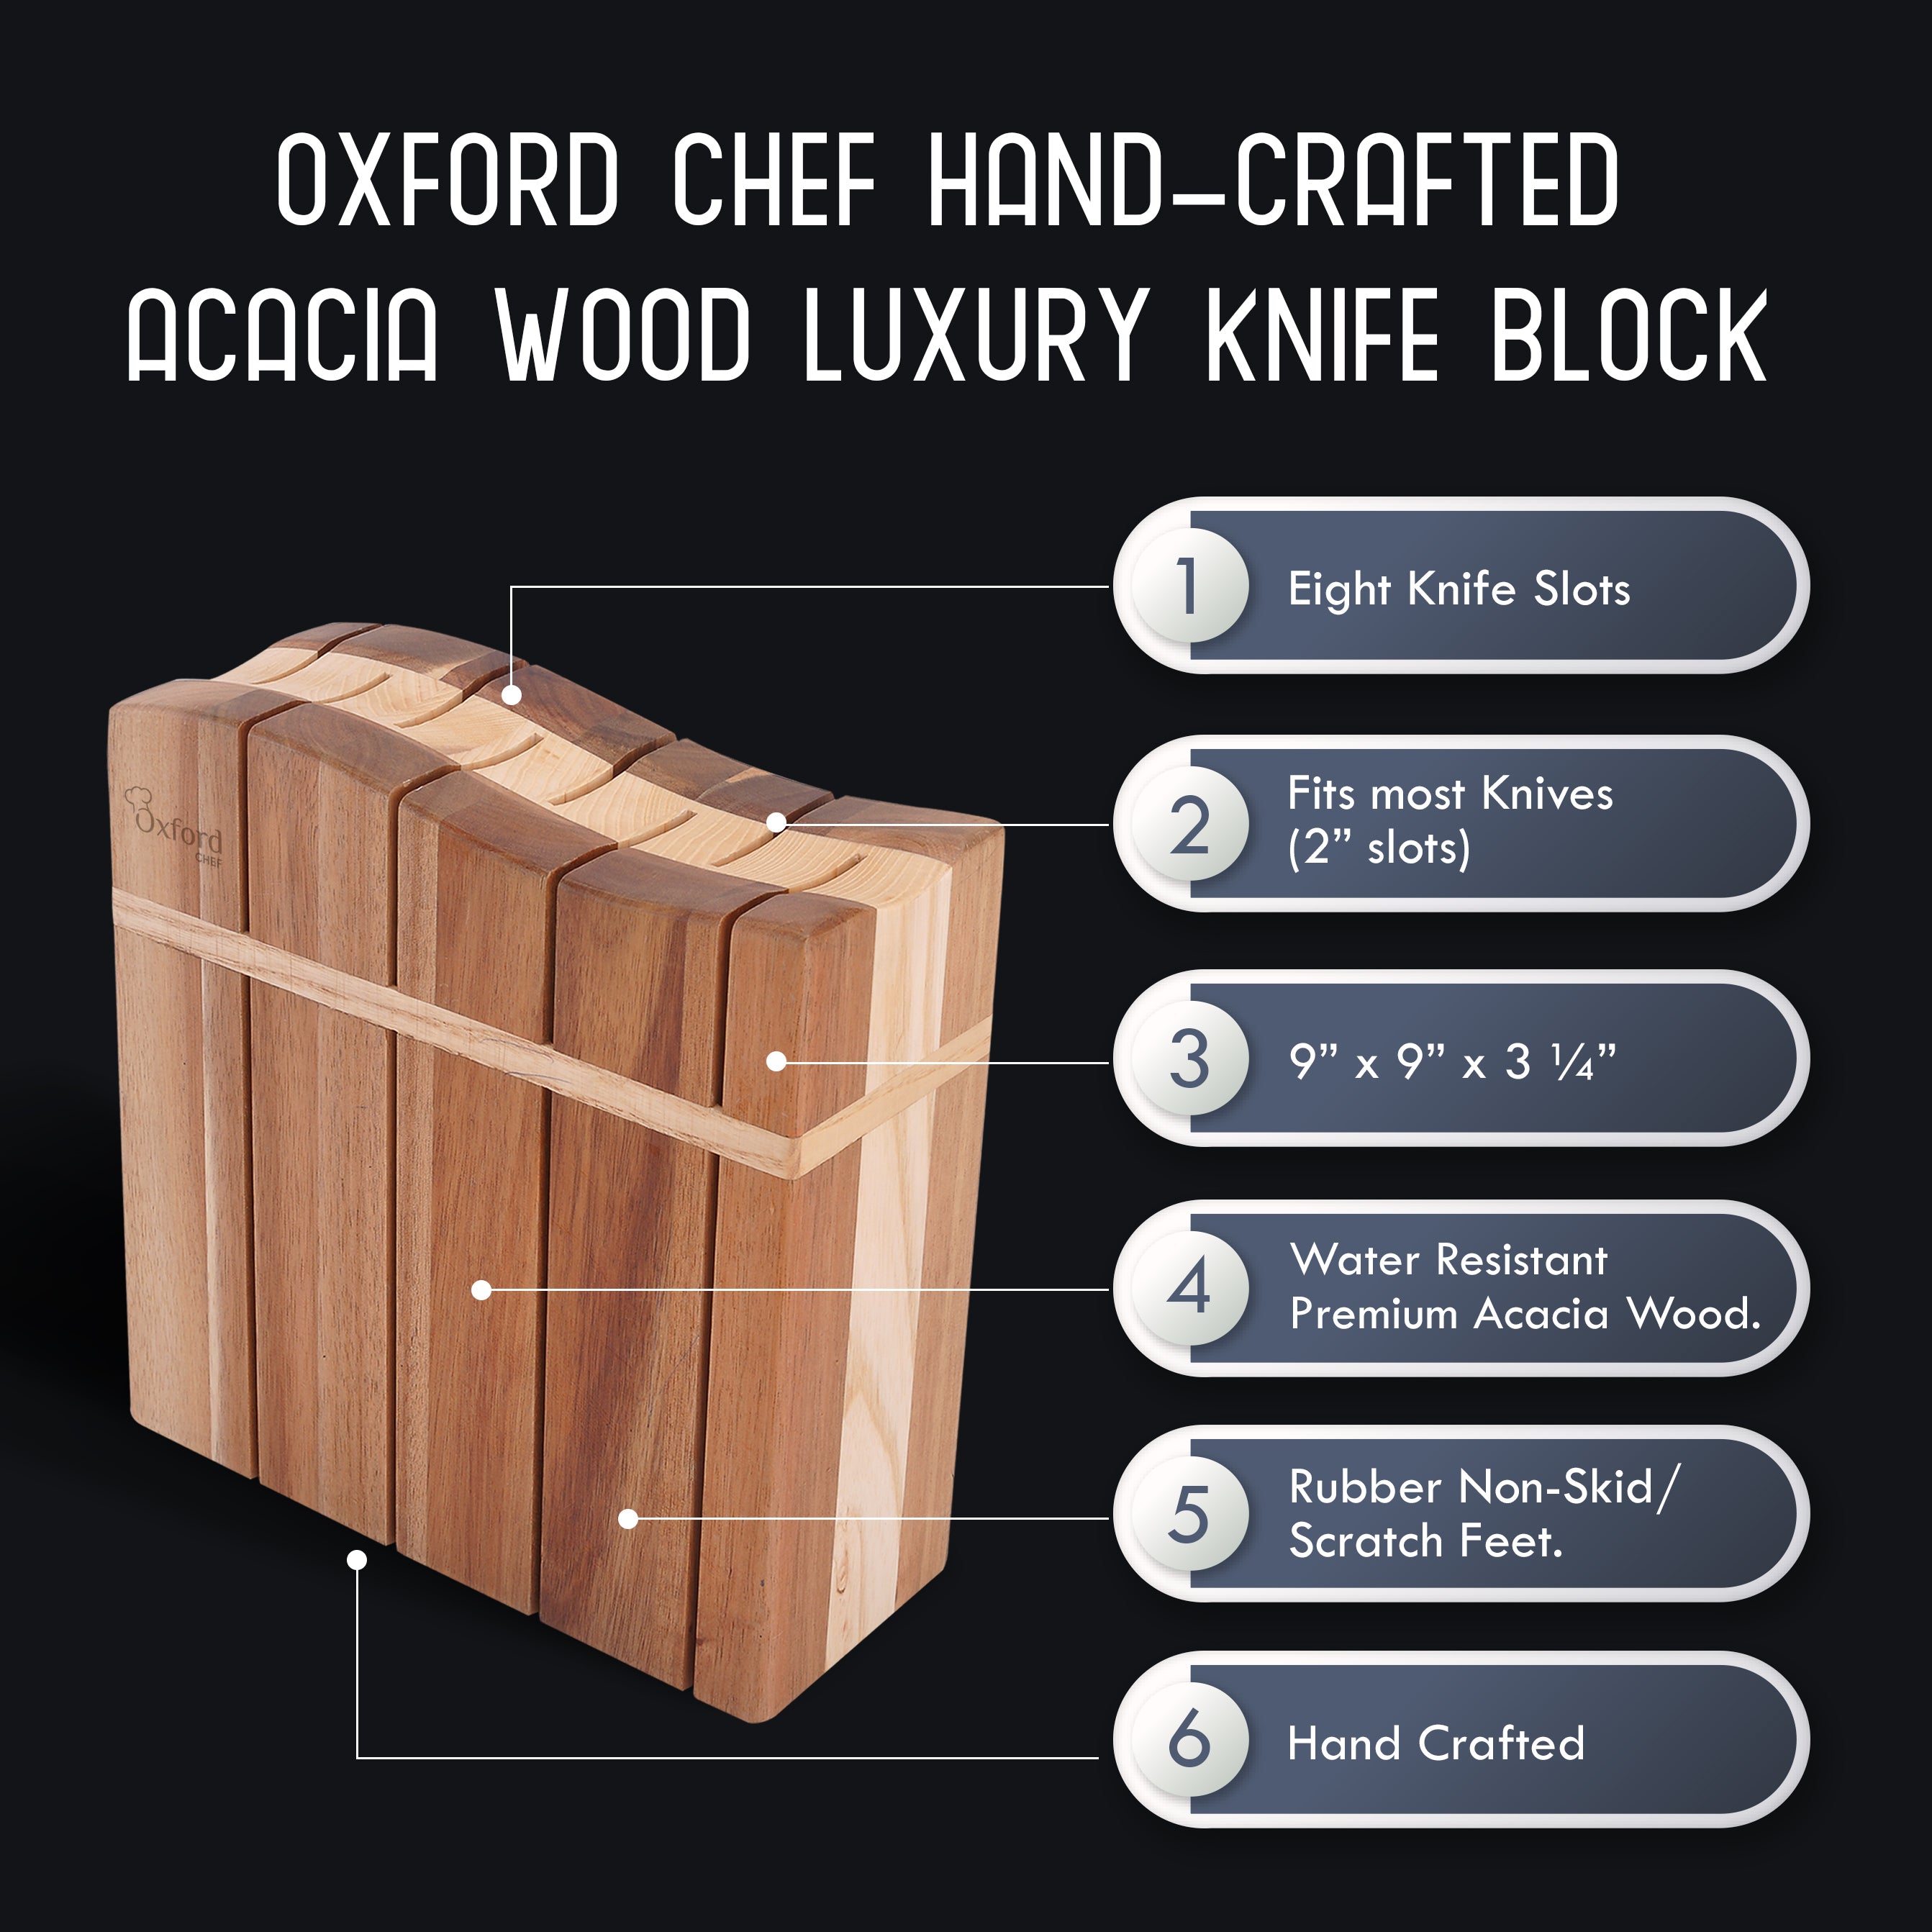 Wooden Kitchen Knife Block - Luxury Hand-Crafted Acacia Wood 8 Slot Storage Block. Can Hold 8 Knives Up To 9" Long. Non-Skid, Non-Scratch Rubber Feet